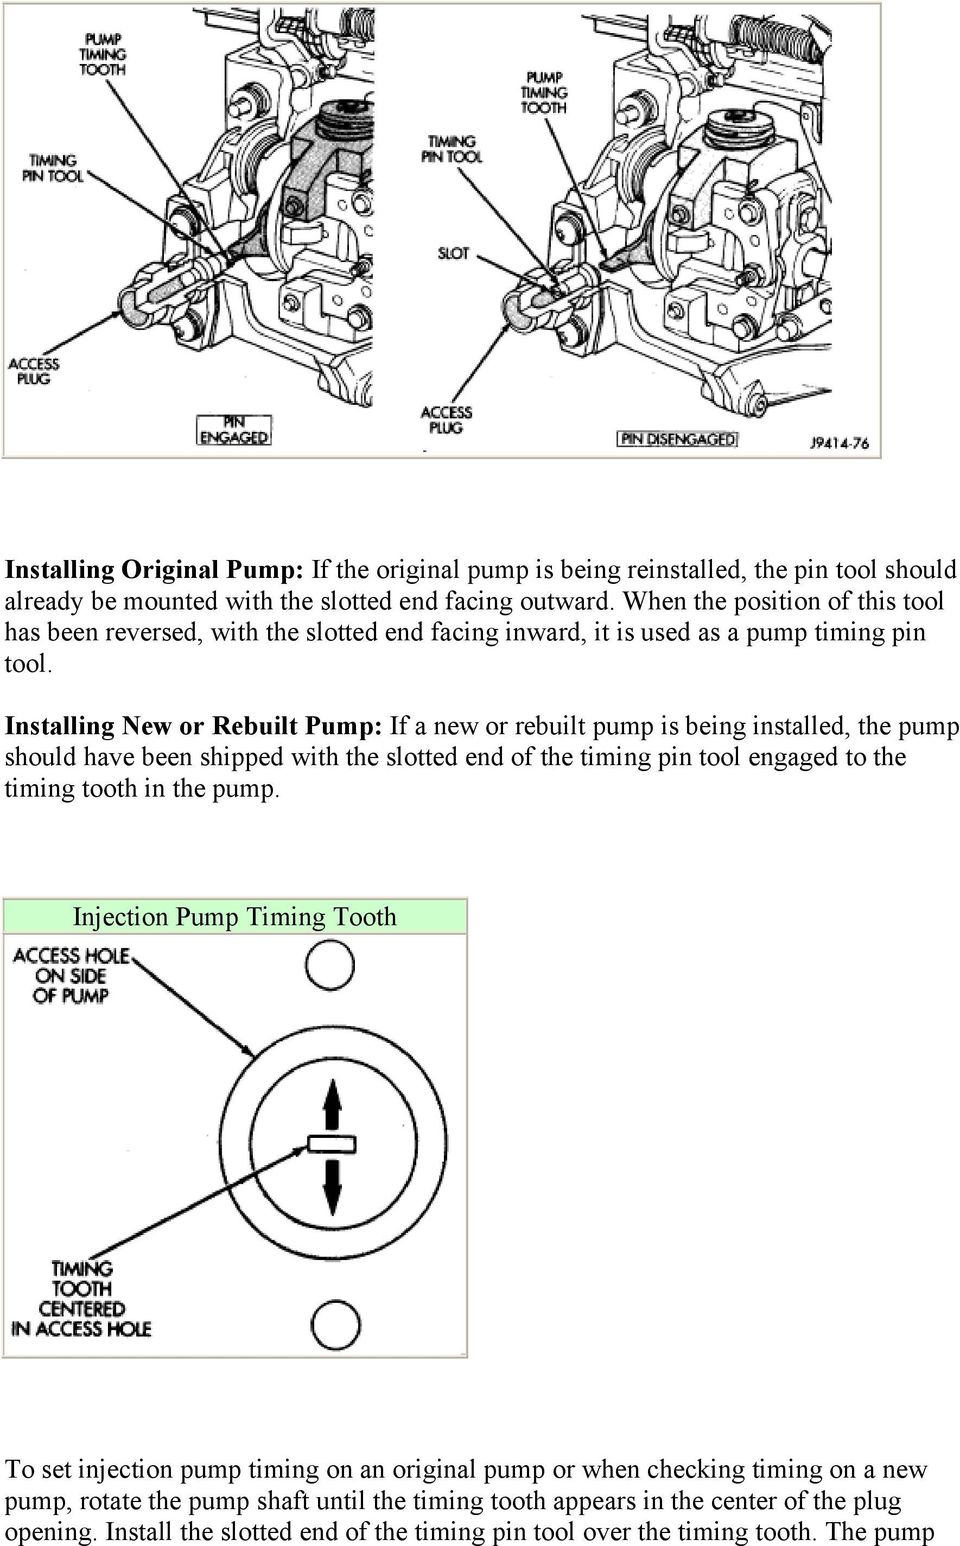 Installing New or Rebuilt Pump: If a new or rebuilt pump is being installed, the pump should have been shipped with the slotted end of the timing pin tool engaged to the timing tooth in